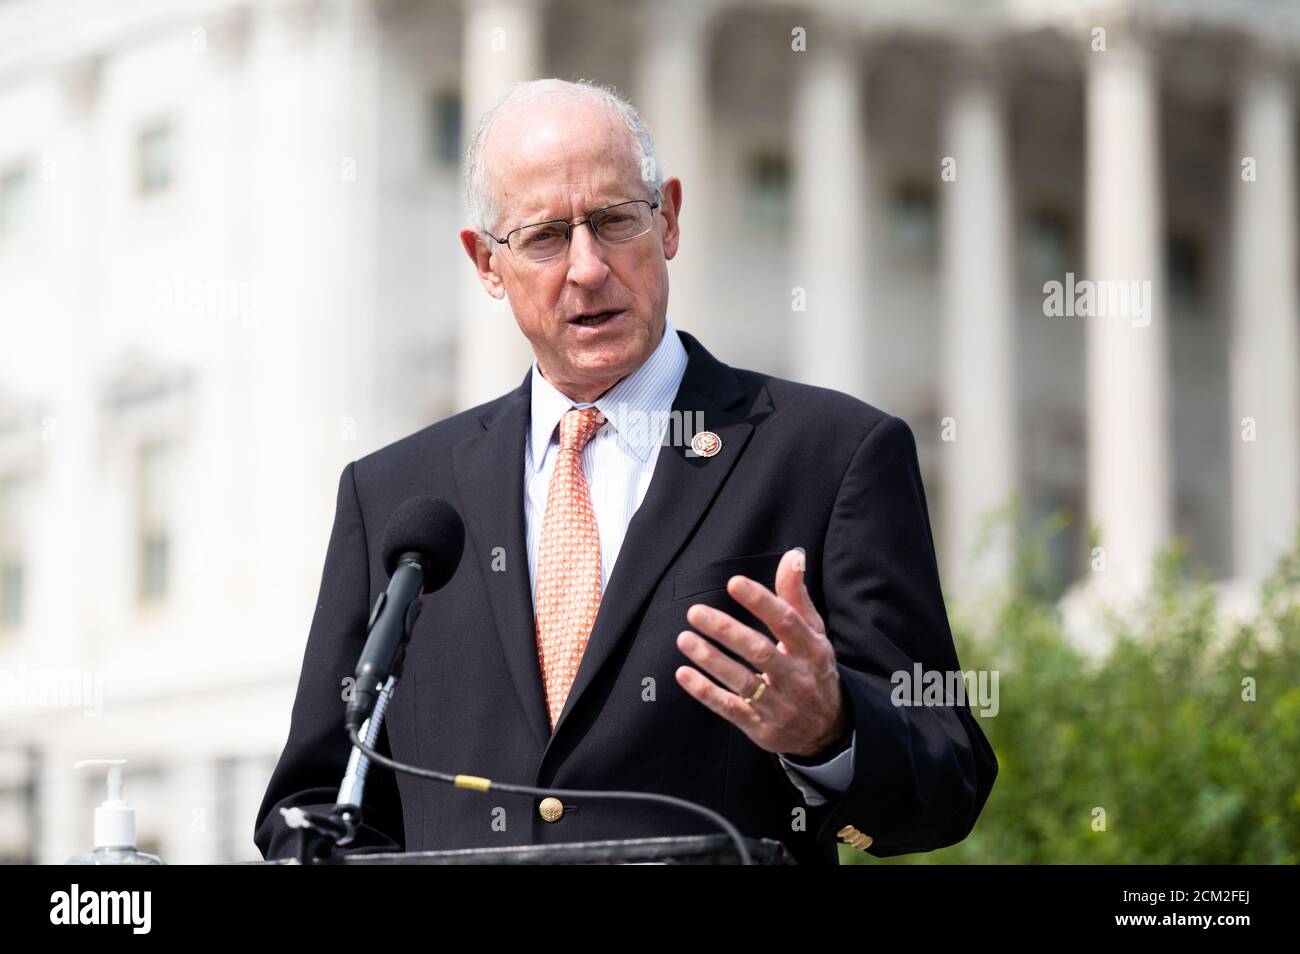 U.S. Representative Mike Conaway (R-TX) speaks at a press conference calling for the release of Trevor Reed from a Russian prison. Stock Photo